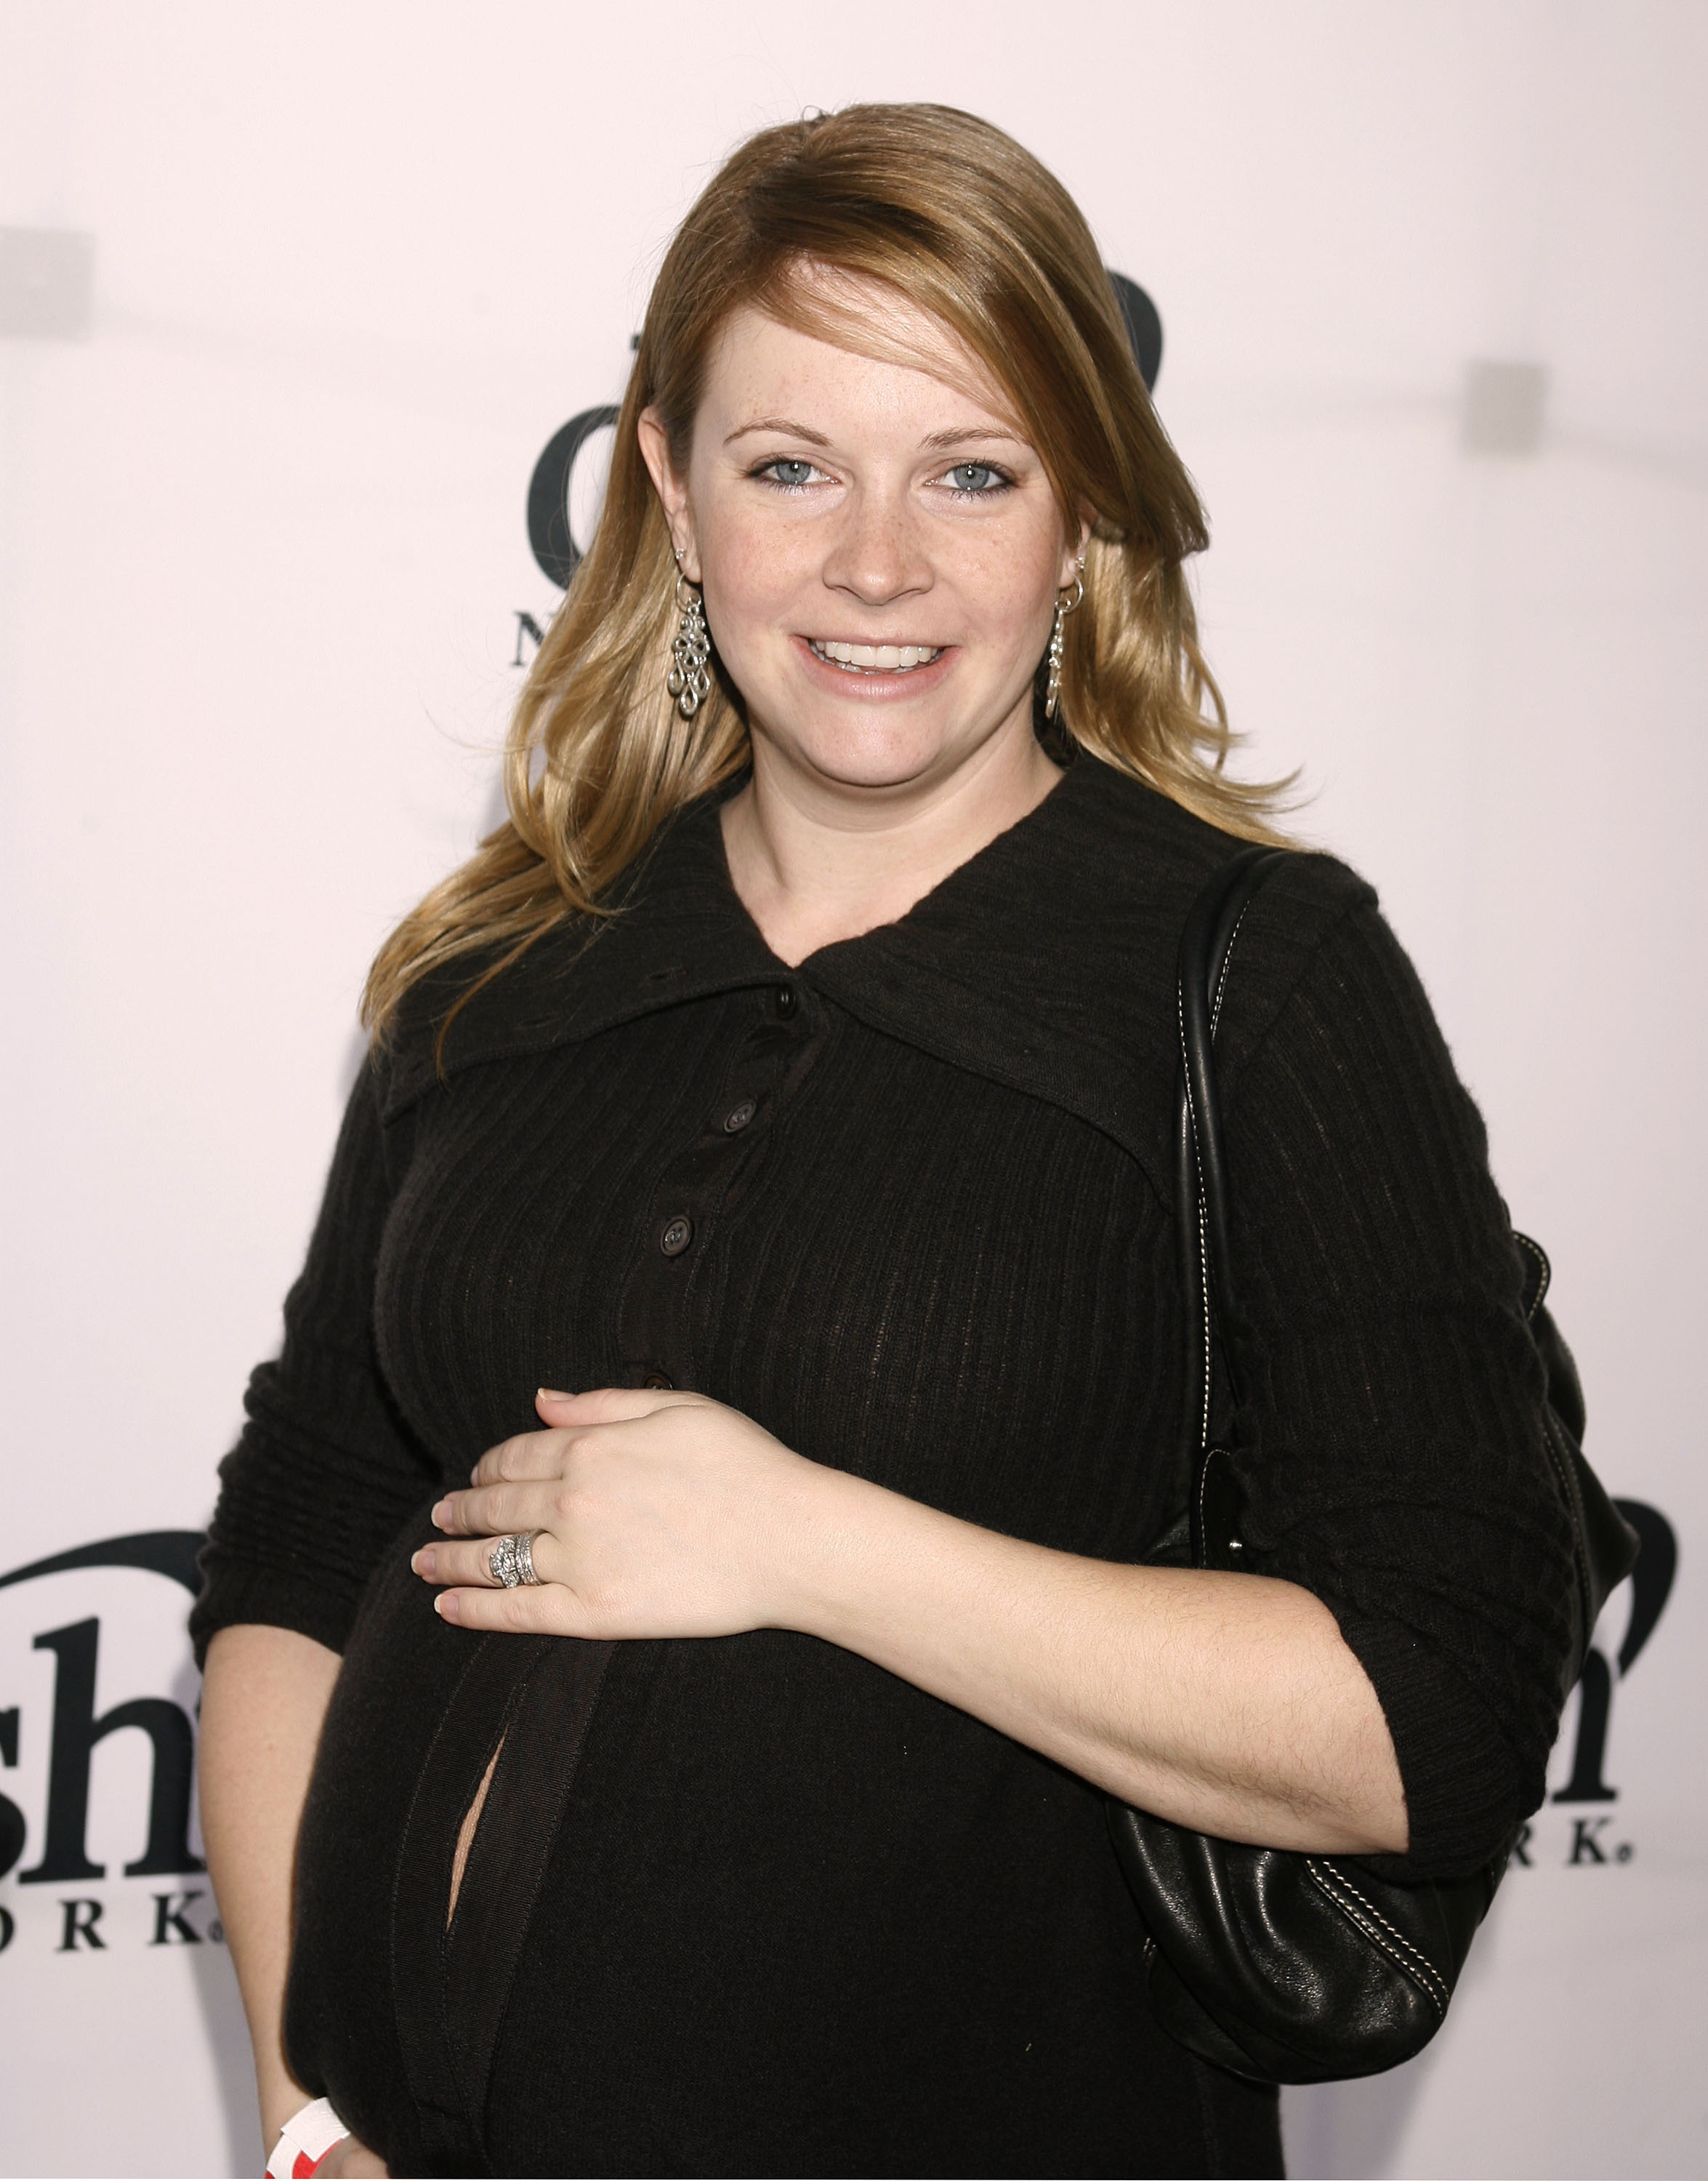 Melissa Joan Hart attends the Boom Boom Room Gifting Wonderland in Century City California, on January 12, 2008. | Source: Getty Images